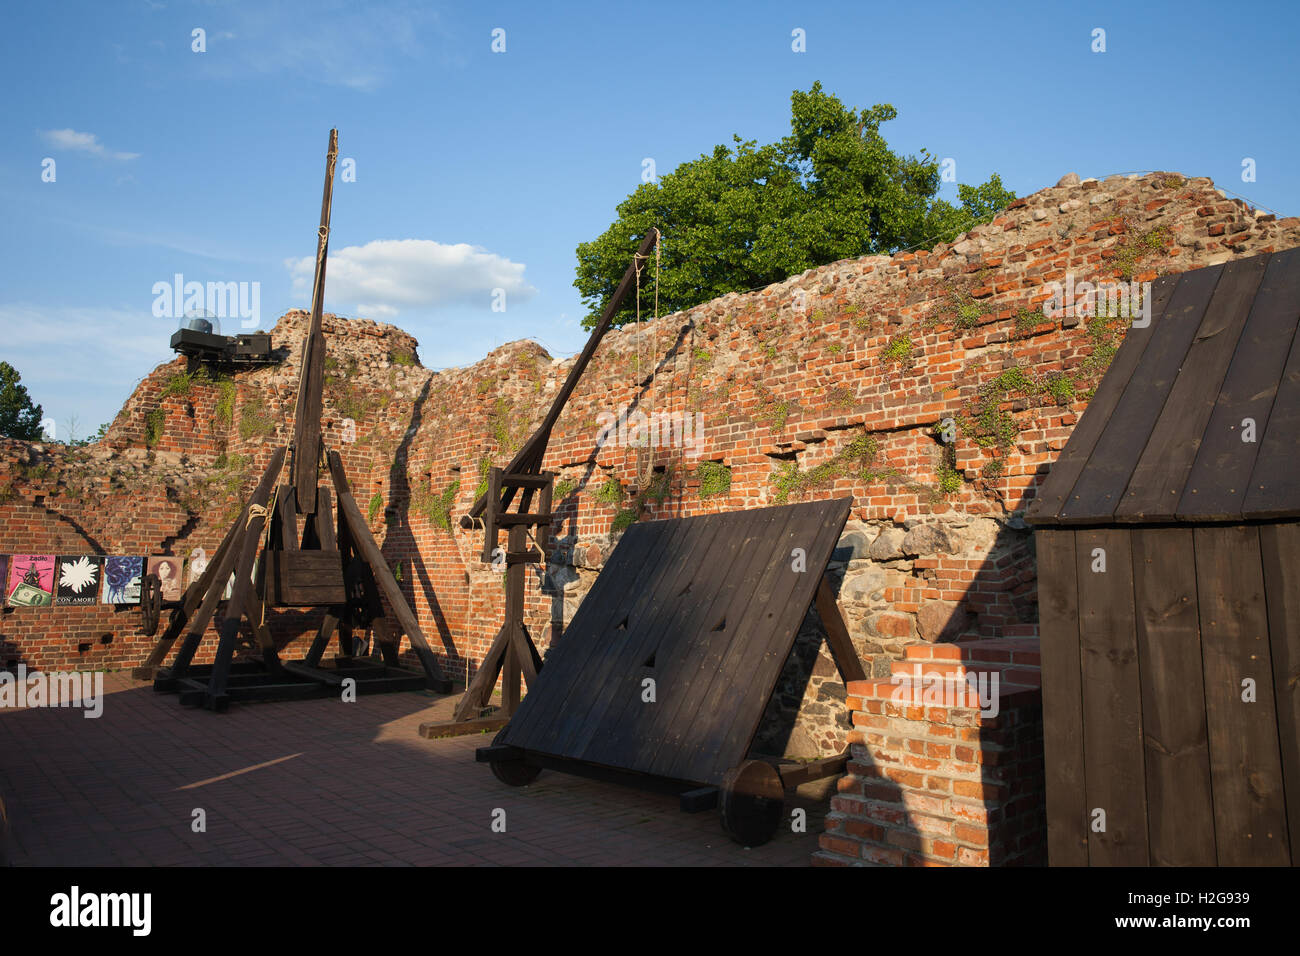 Trebuchet and perriere medieval siege engine, hurling machines and protective screen wall in Torun Castle, Poland, Europe Stock Photo